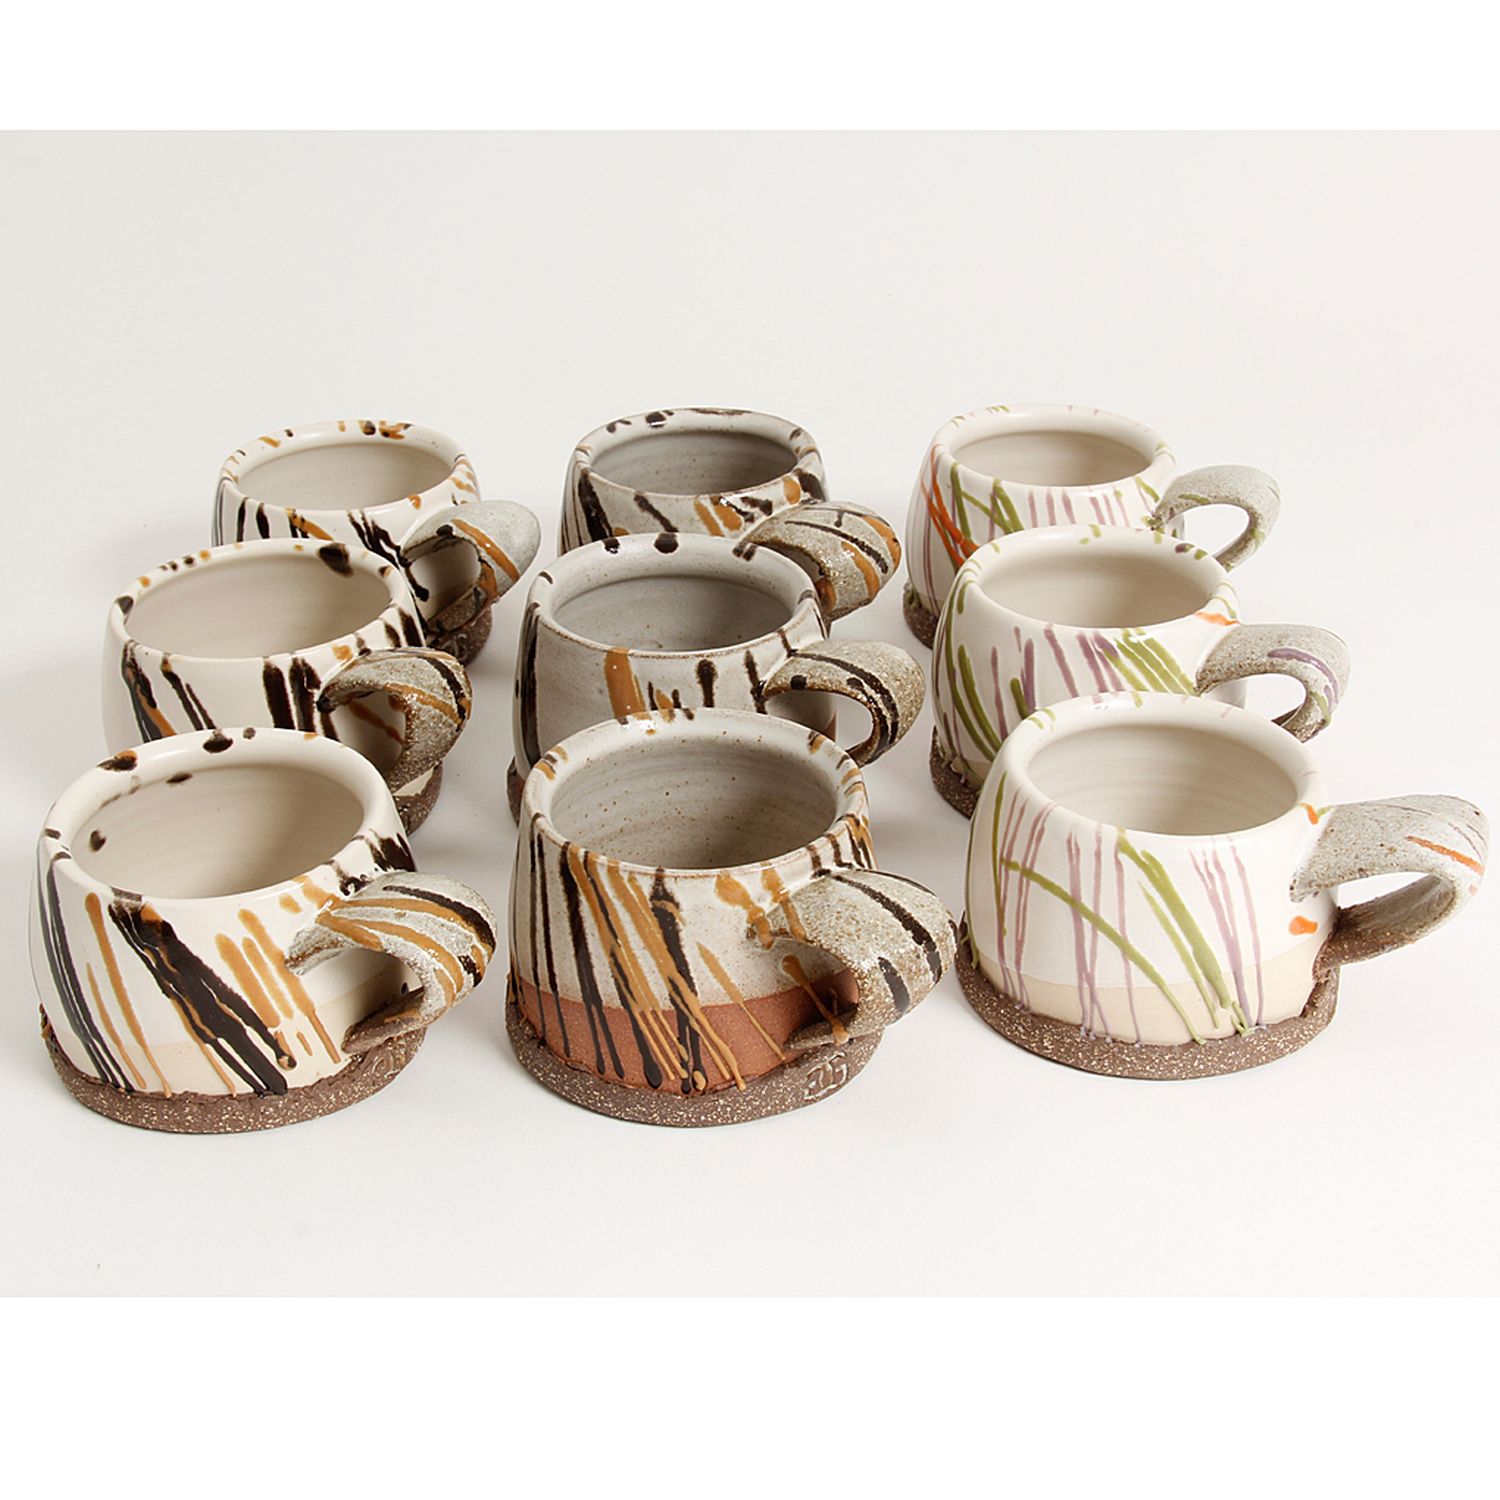 Gracia Isabel Gomez: Espresso mug in Brown Chocolate Product Image 4 of 6